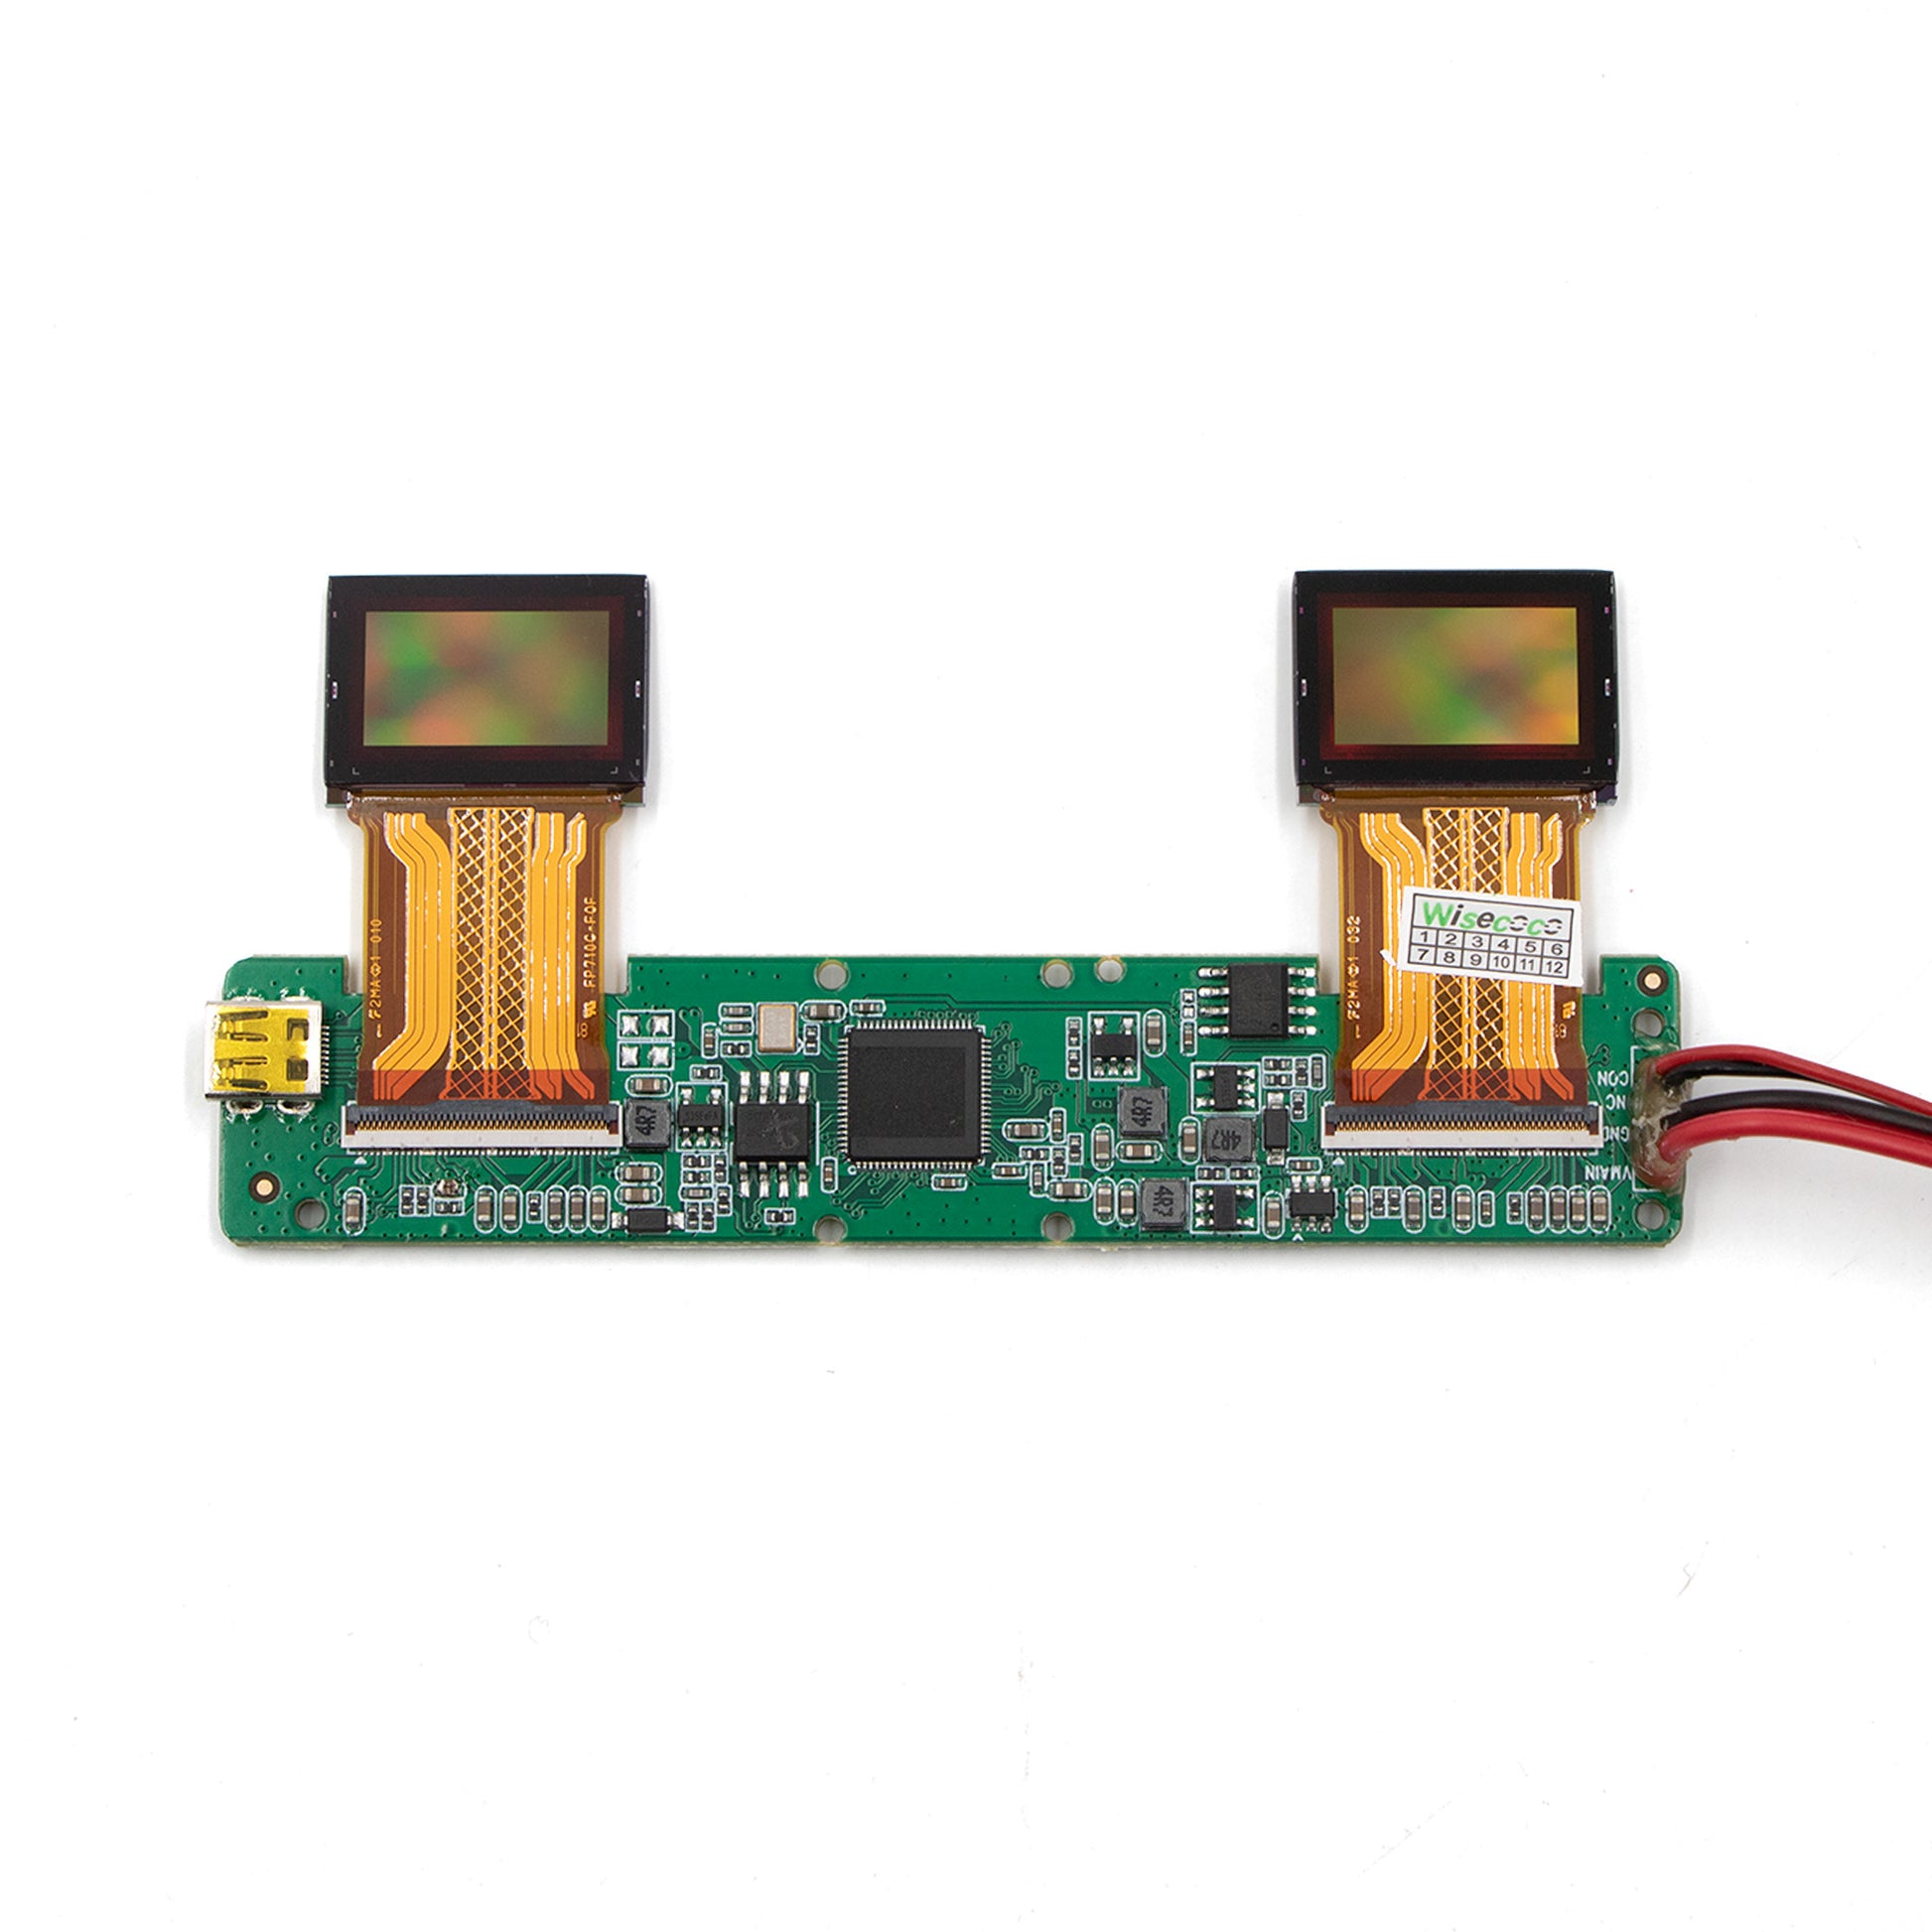 Adapter board facilitating HDMI to LVDS conversion, designed for microdisplays